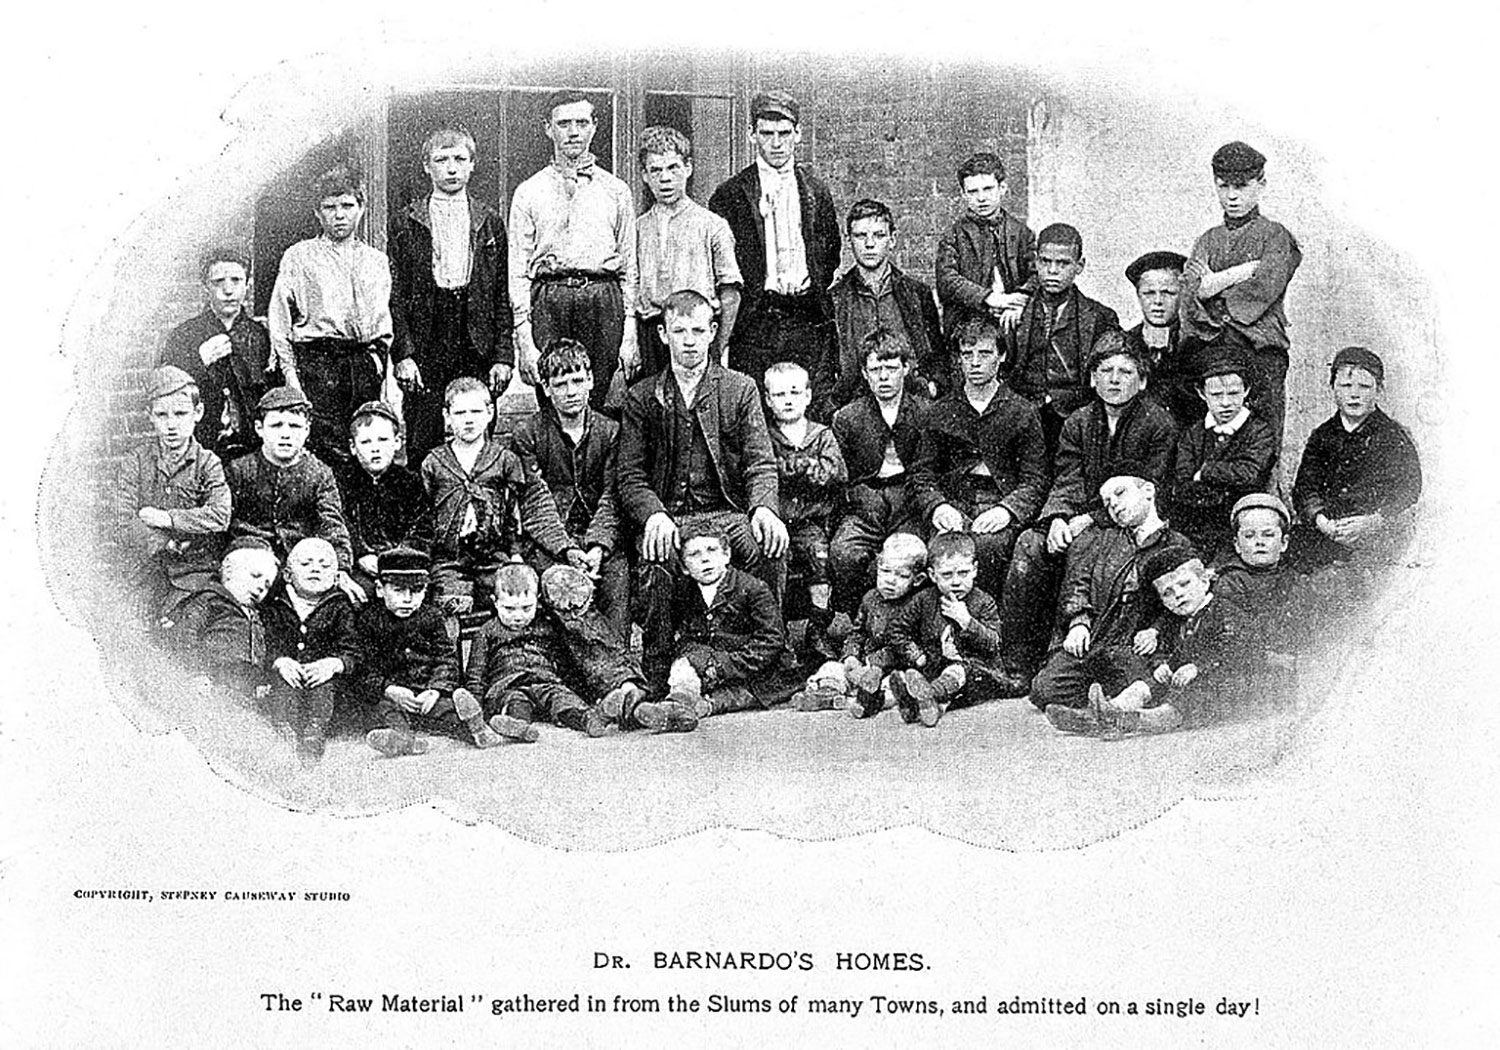 Photo showing a group of young children outside a Barnardo's home